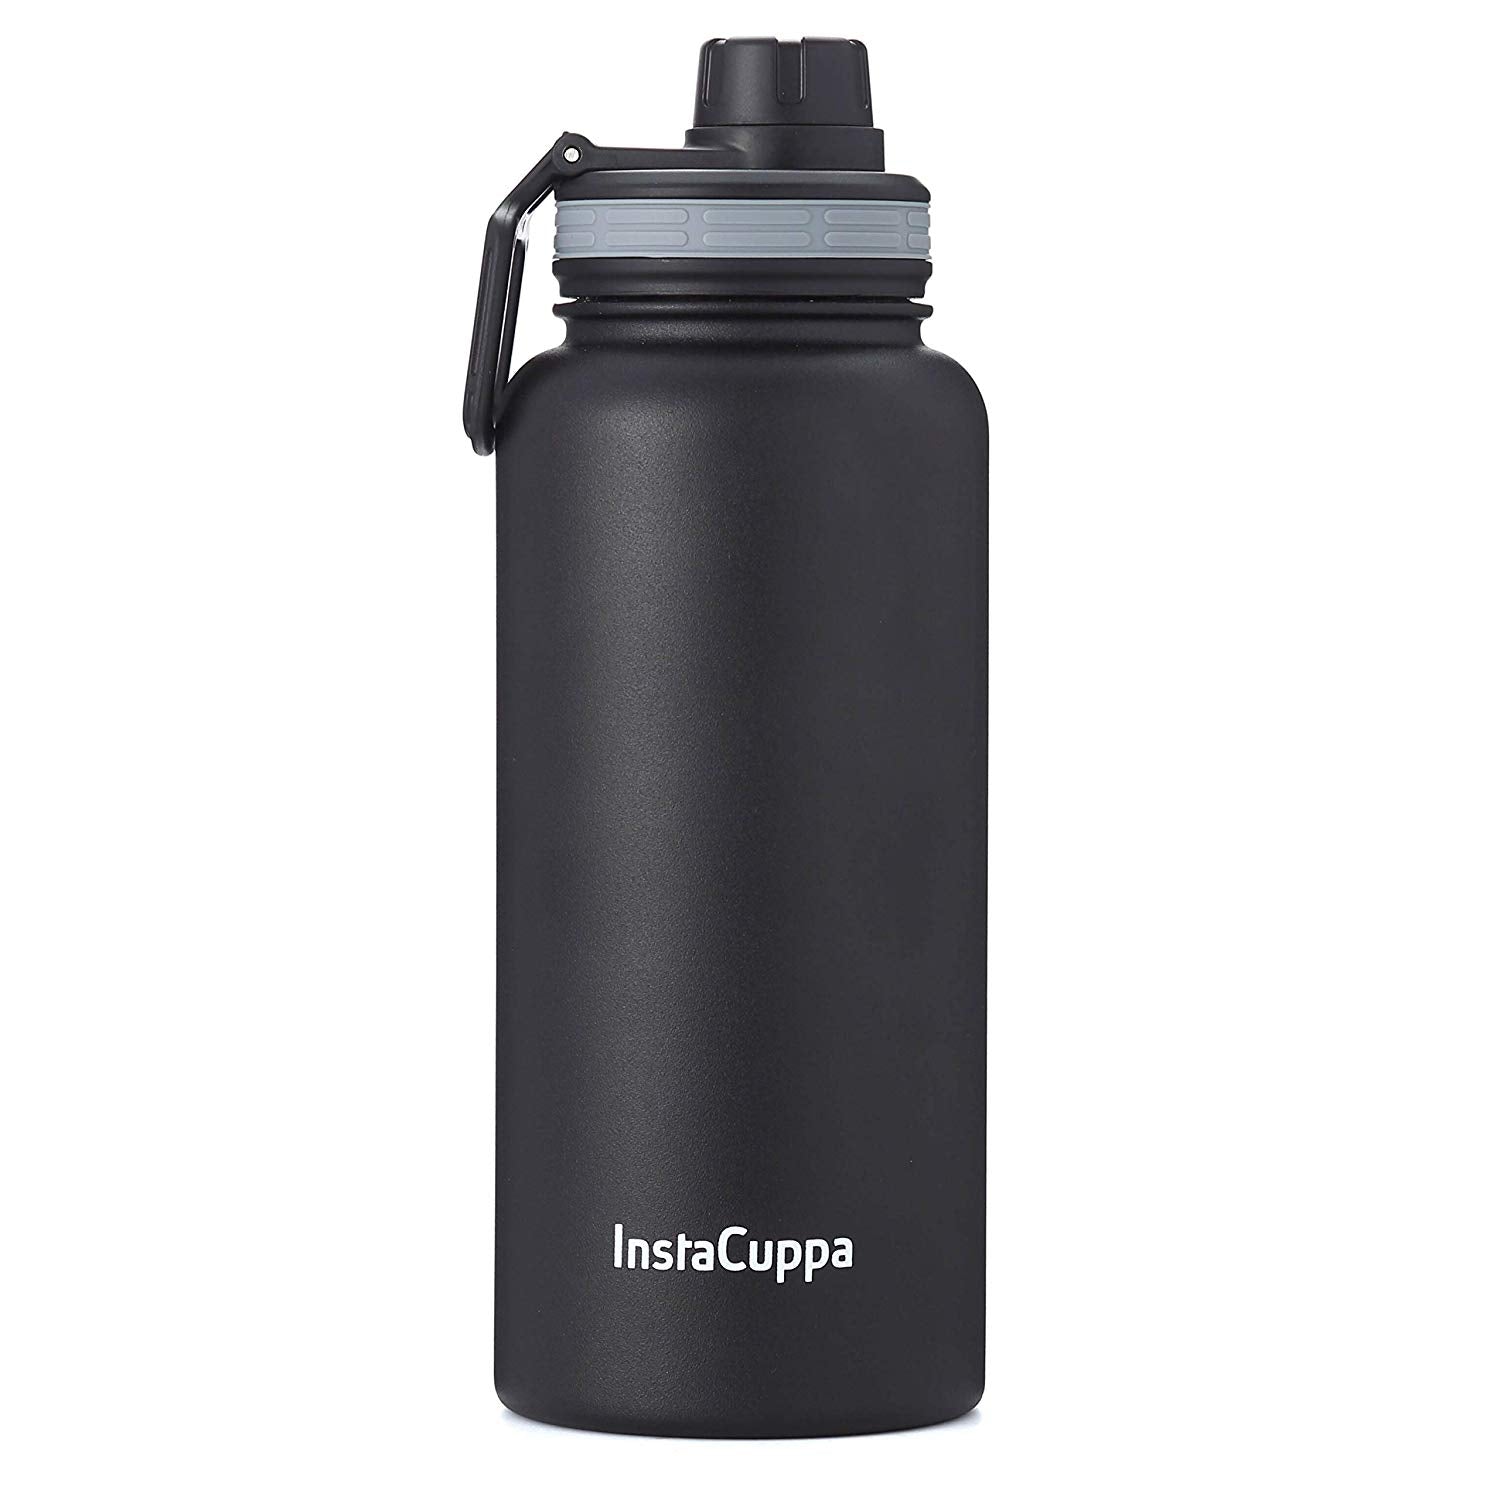 Super Large Premium Stainless Steel Coffee Thermos Bottle - Weee!